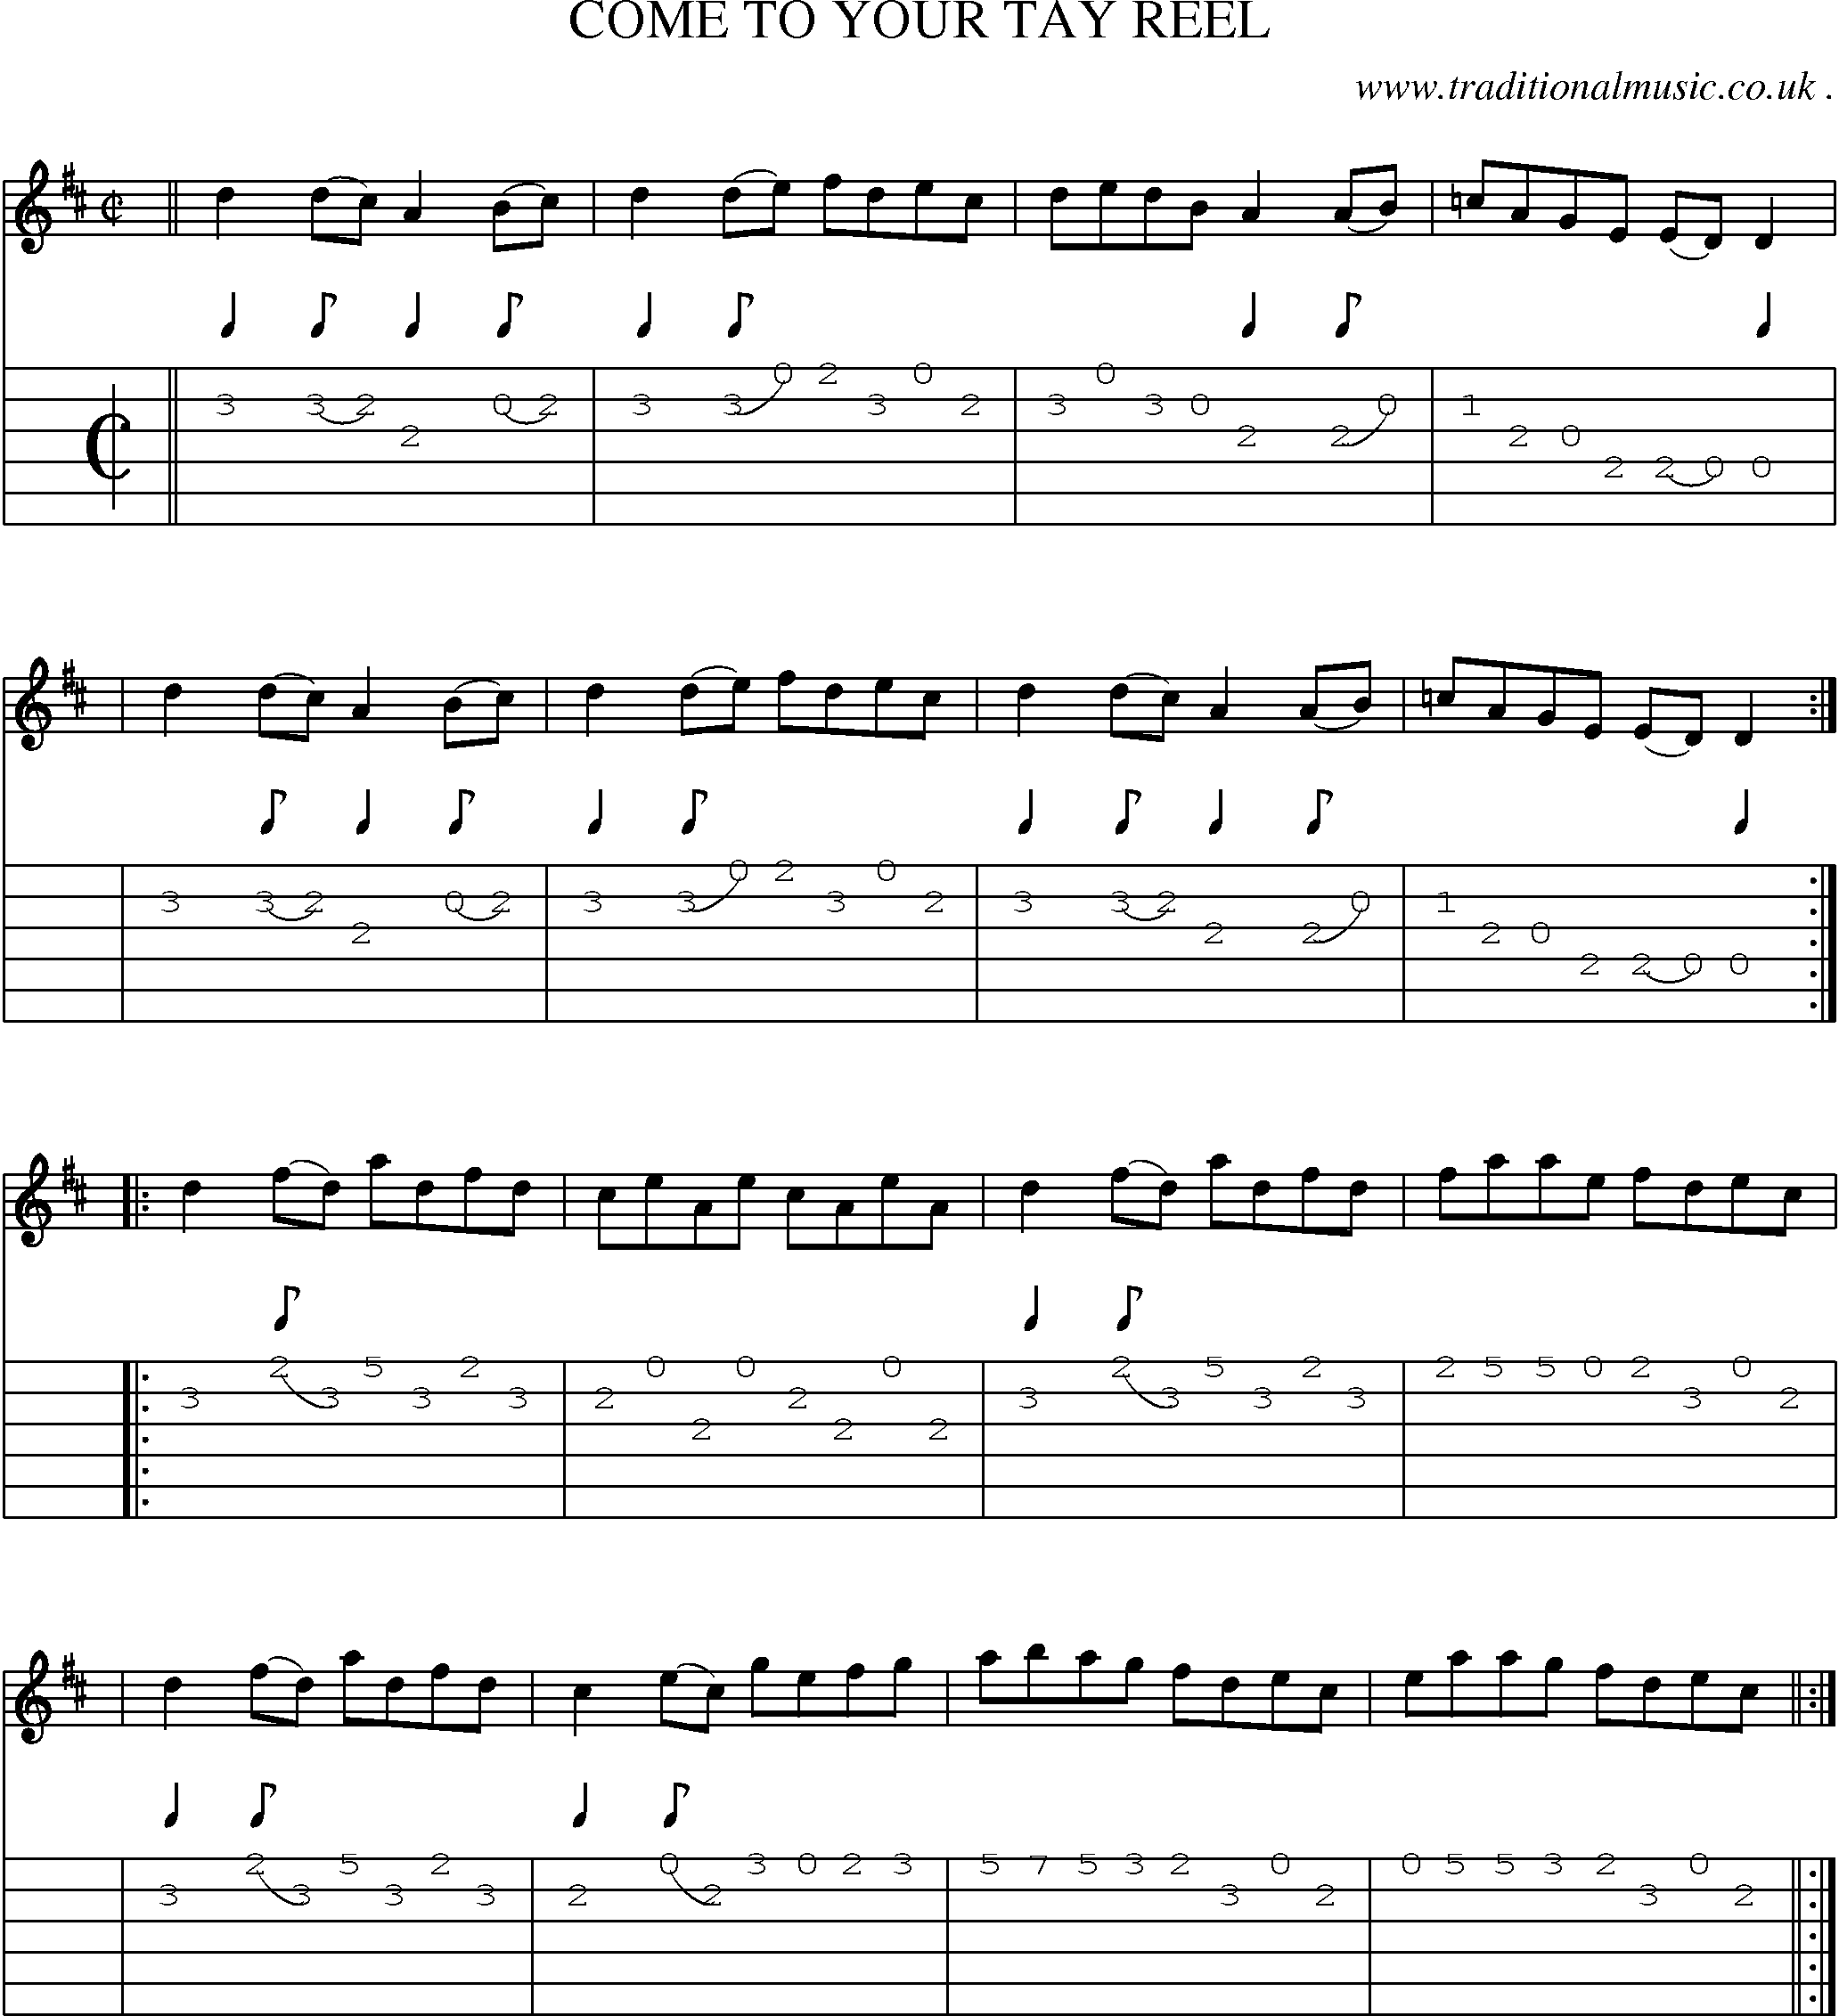 Sheet-Music and Guitar Tabs for Come To Your Tay Reel